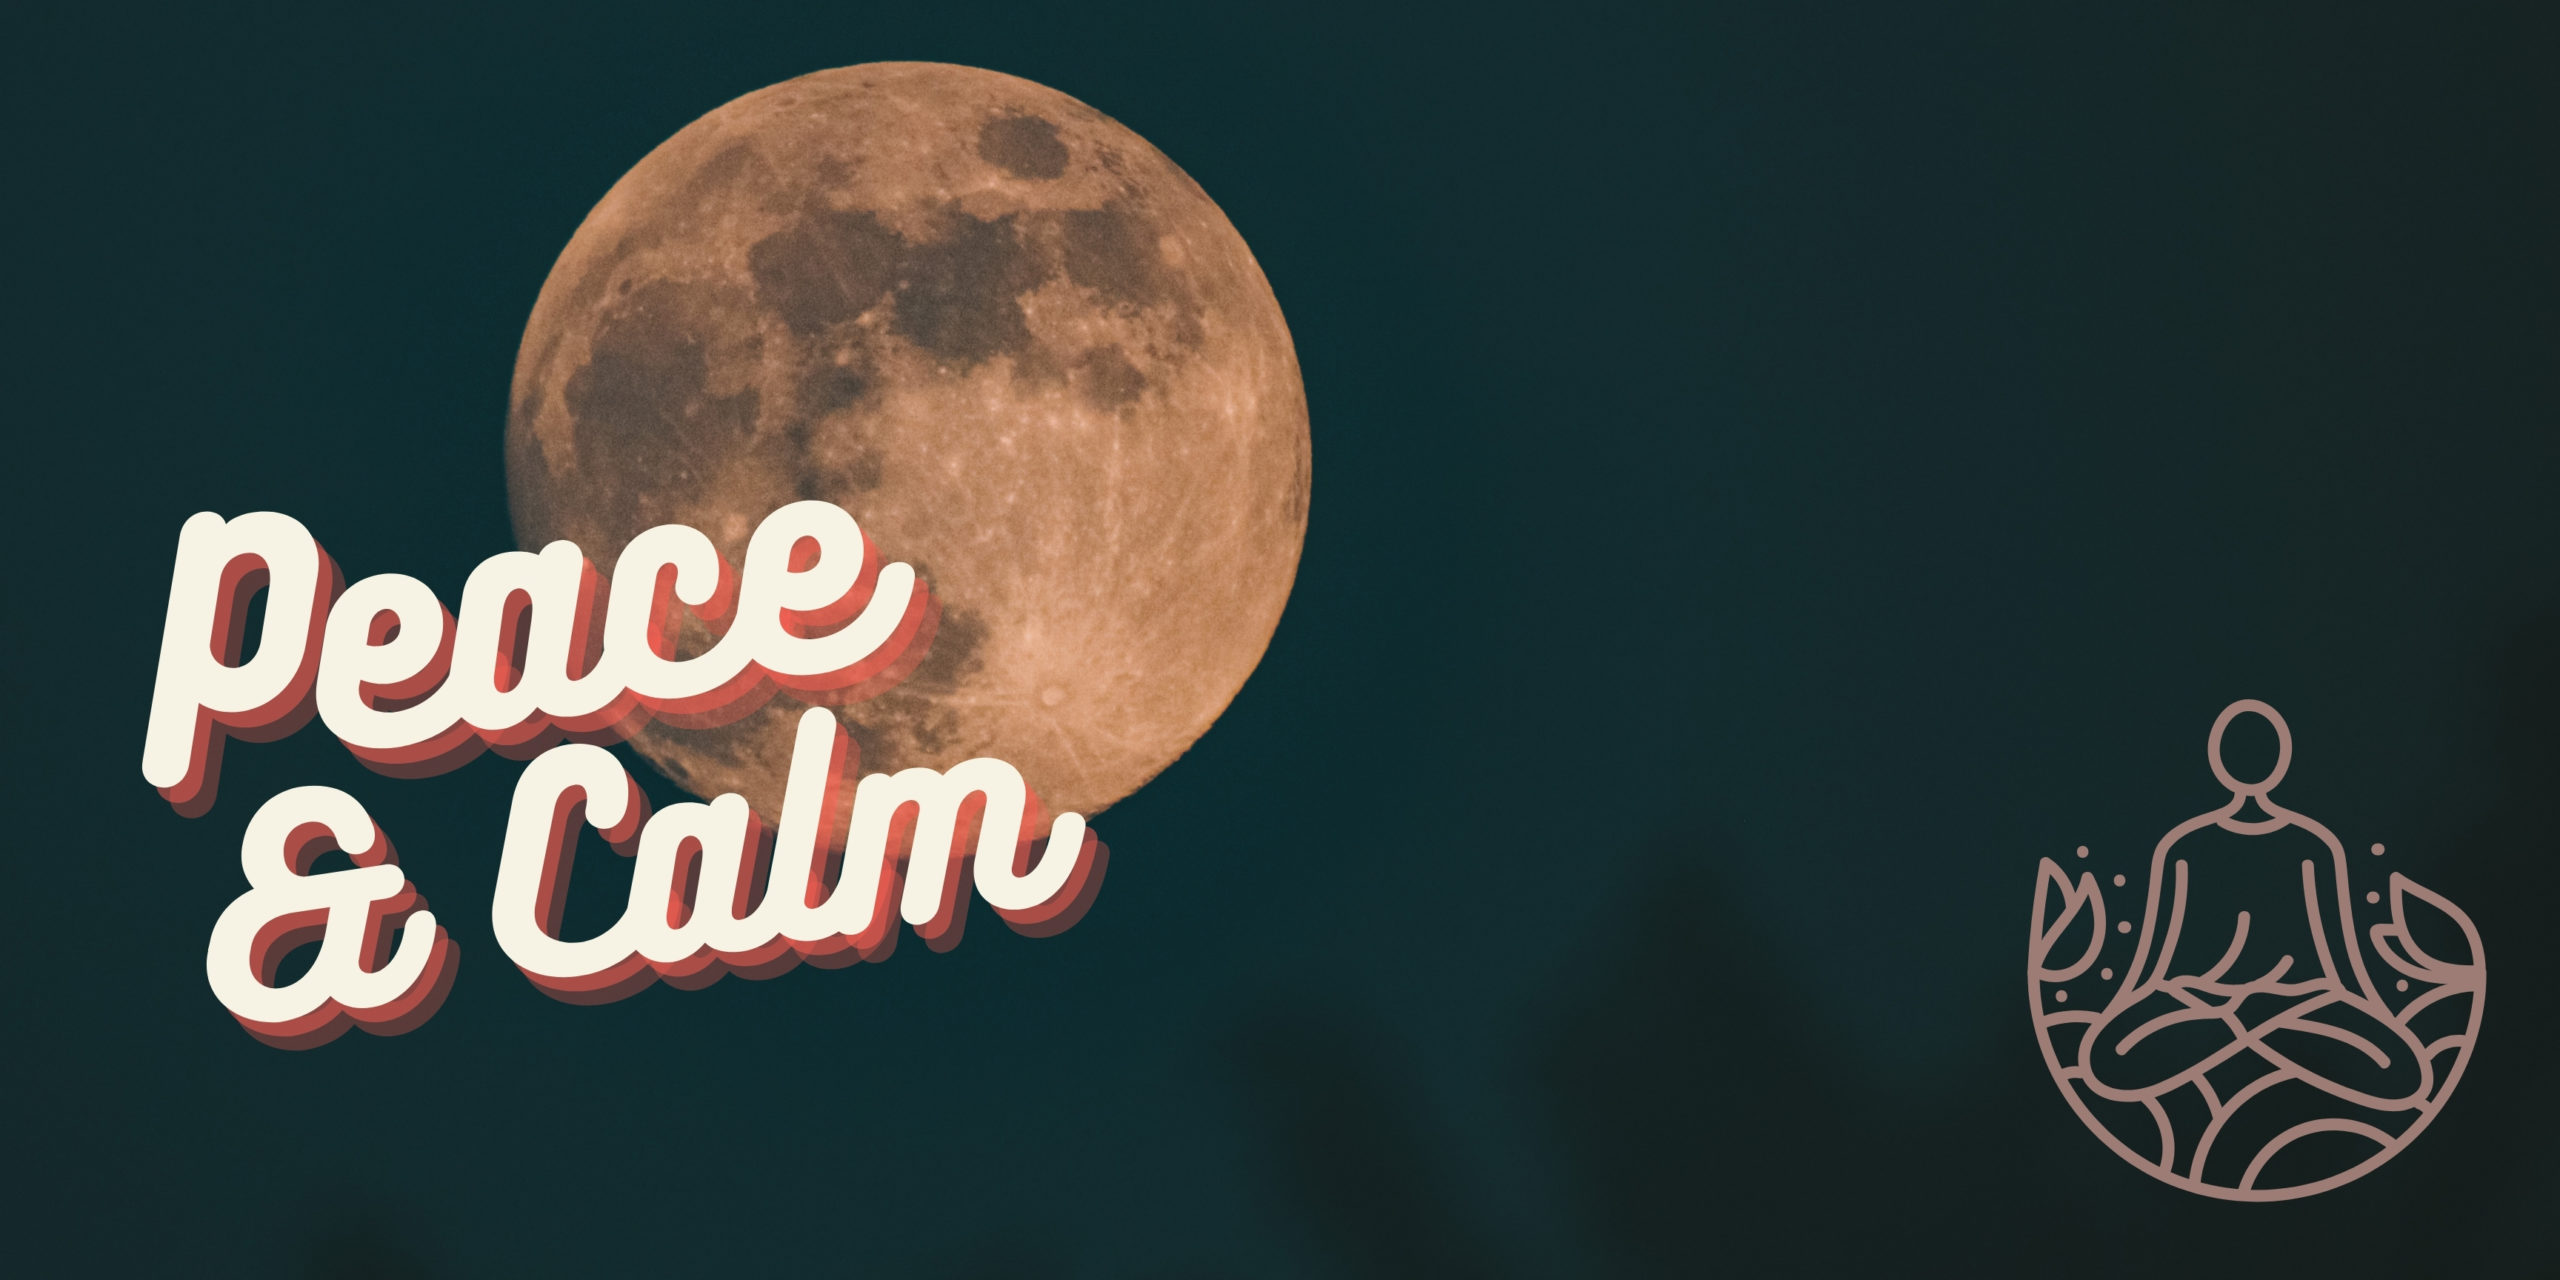 peace, calm and strawberry moon